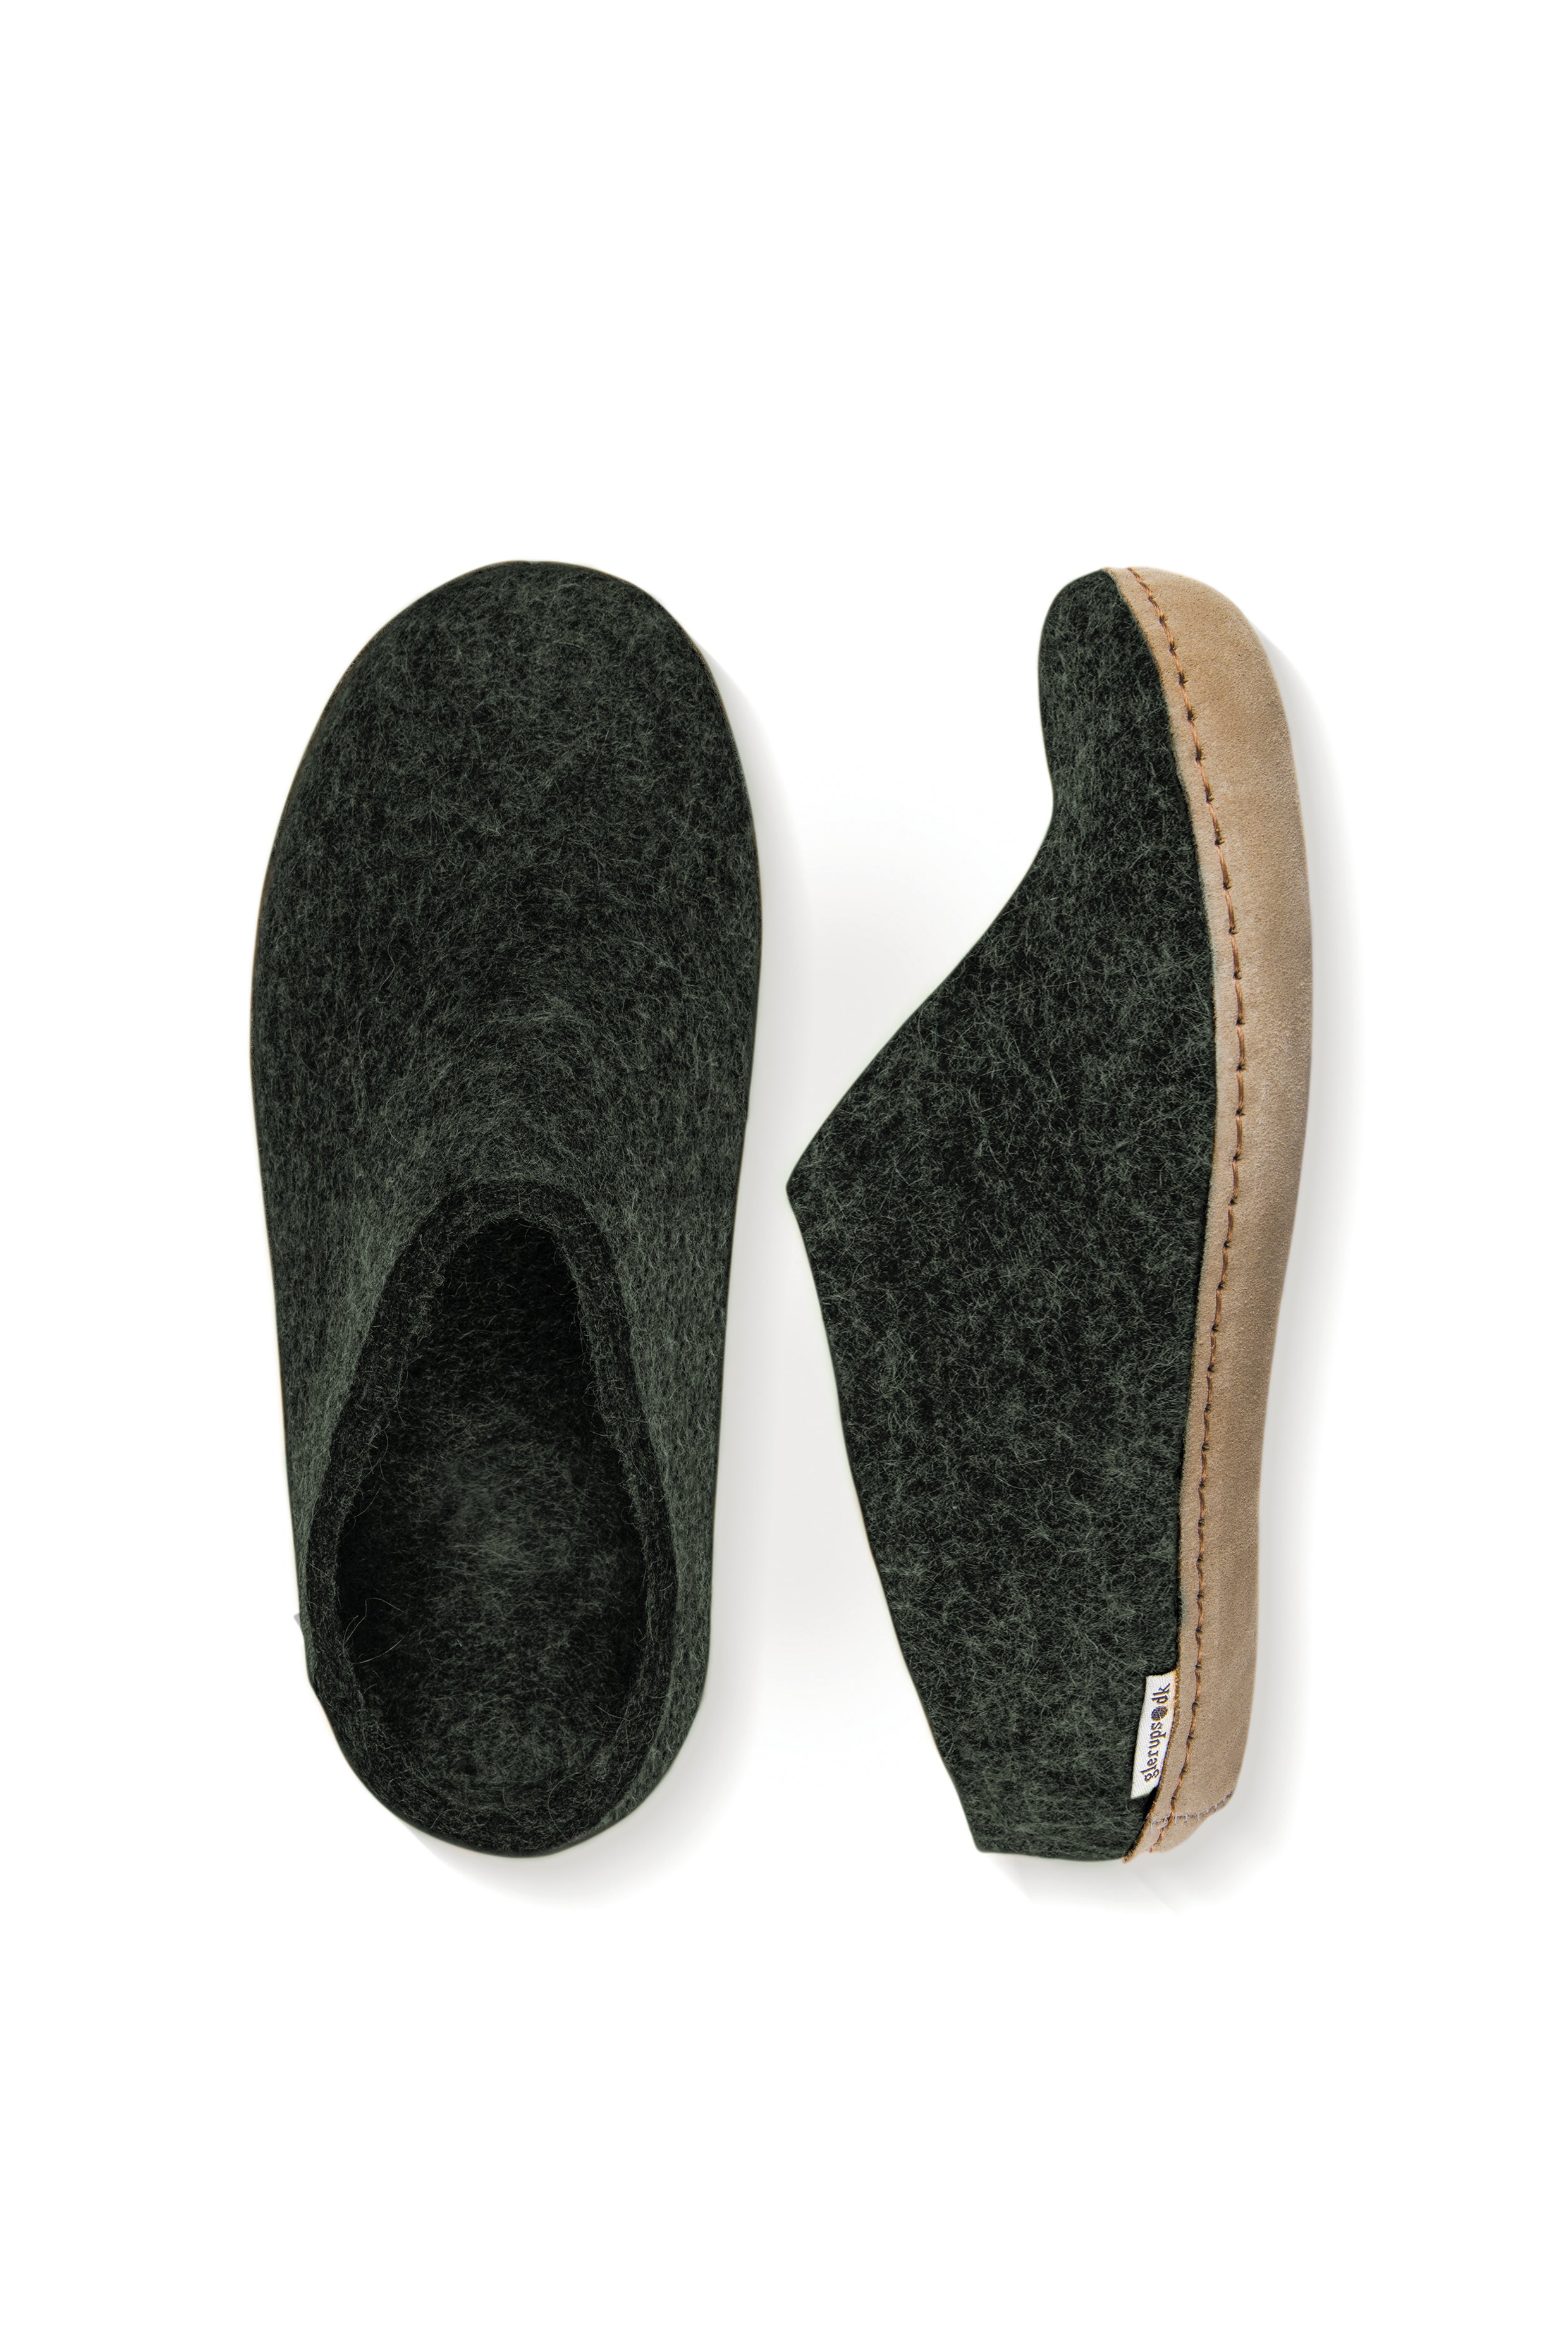 Glerups Slip On Leather Sole Forest